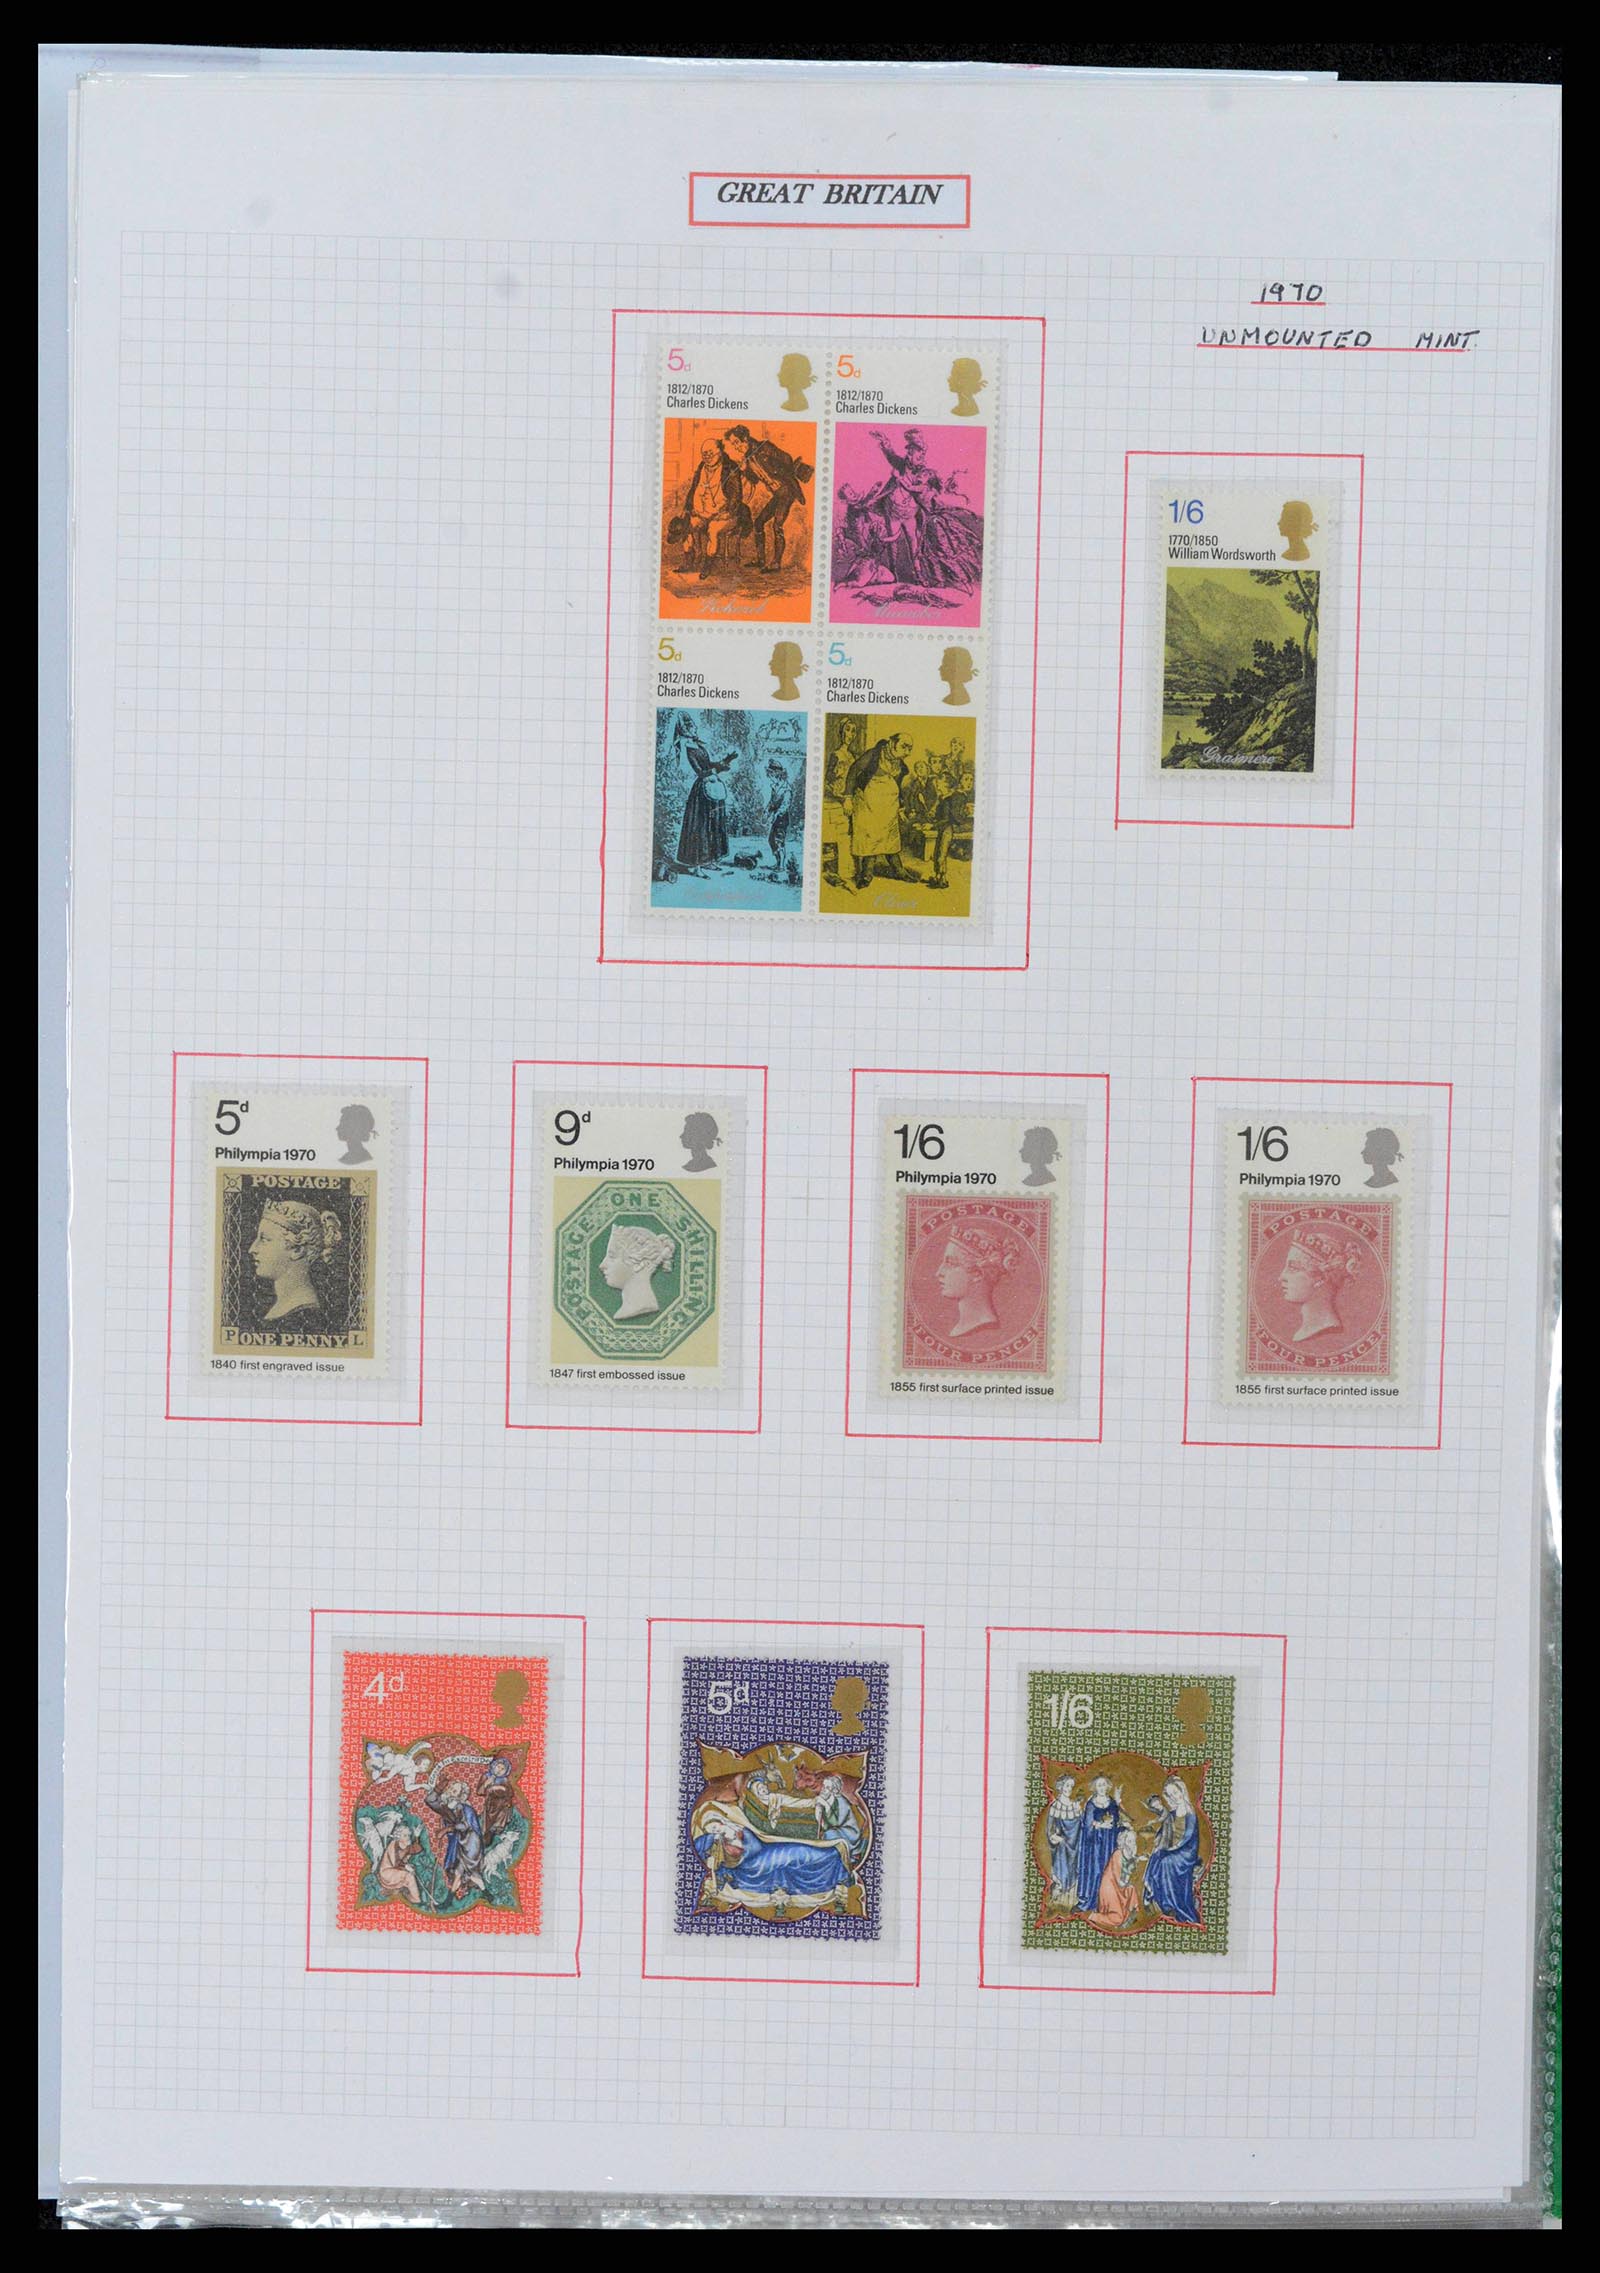 38253 0037 - Stamp collection 38253 Great Britain 1912-2002.